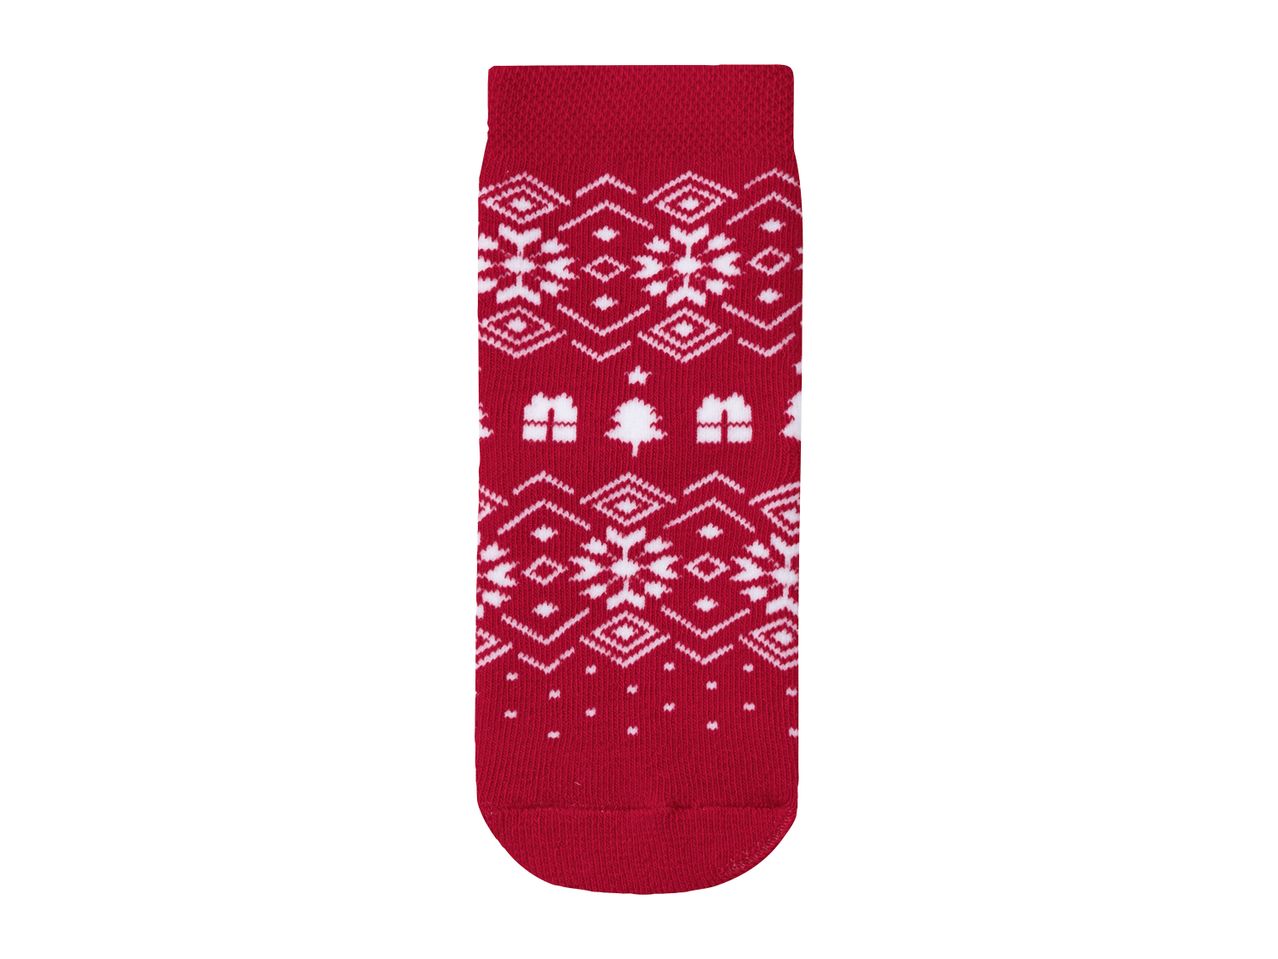 Go to full screen view: Lupilu Younger Kids’ Christmas Thermal Socks - 2 pairs - Image 4